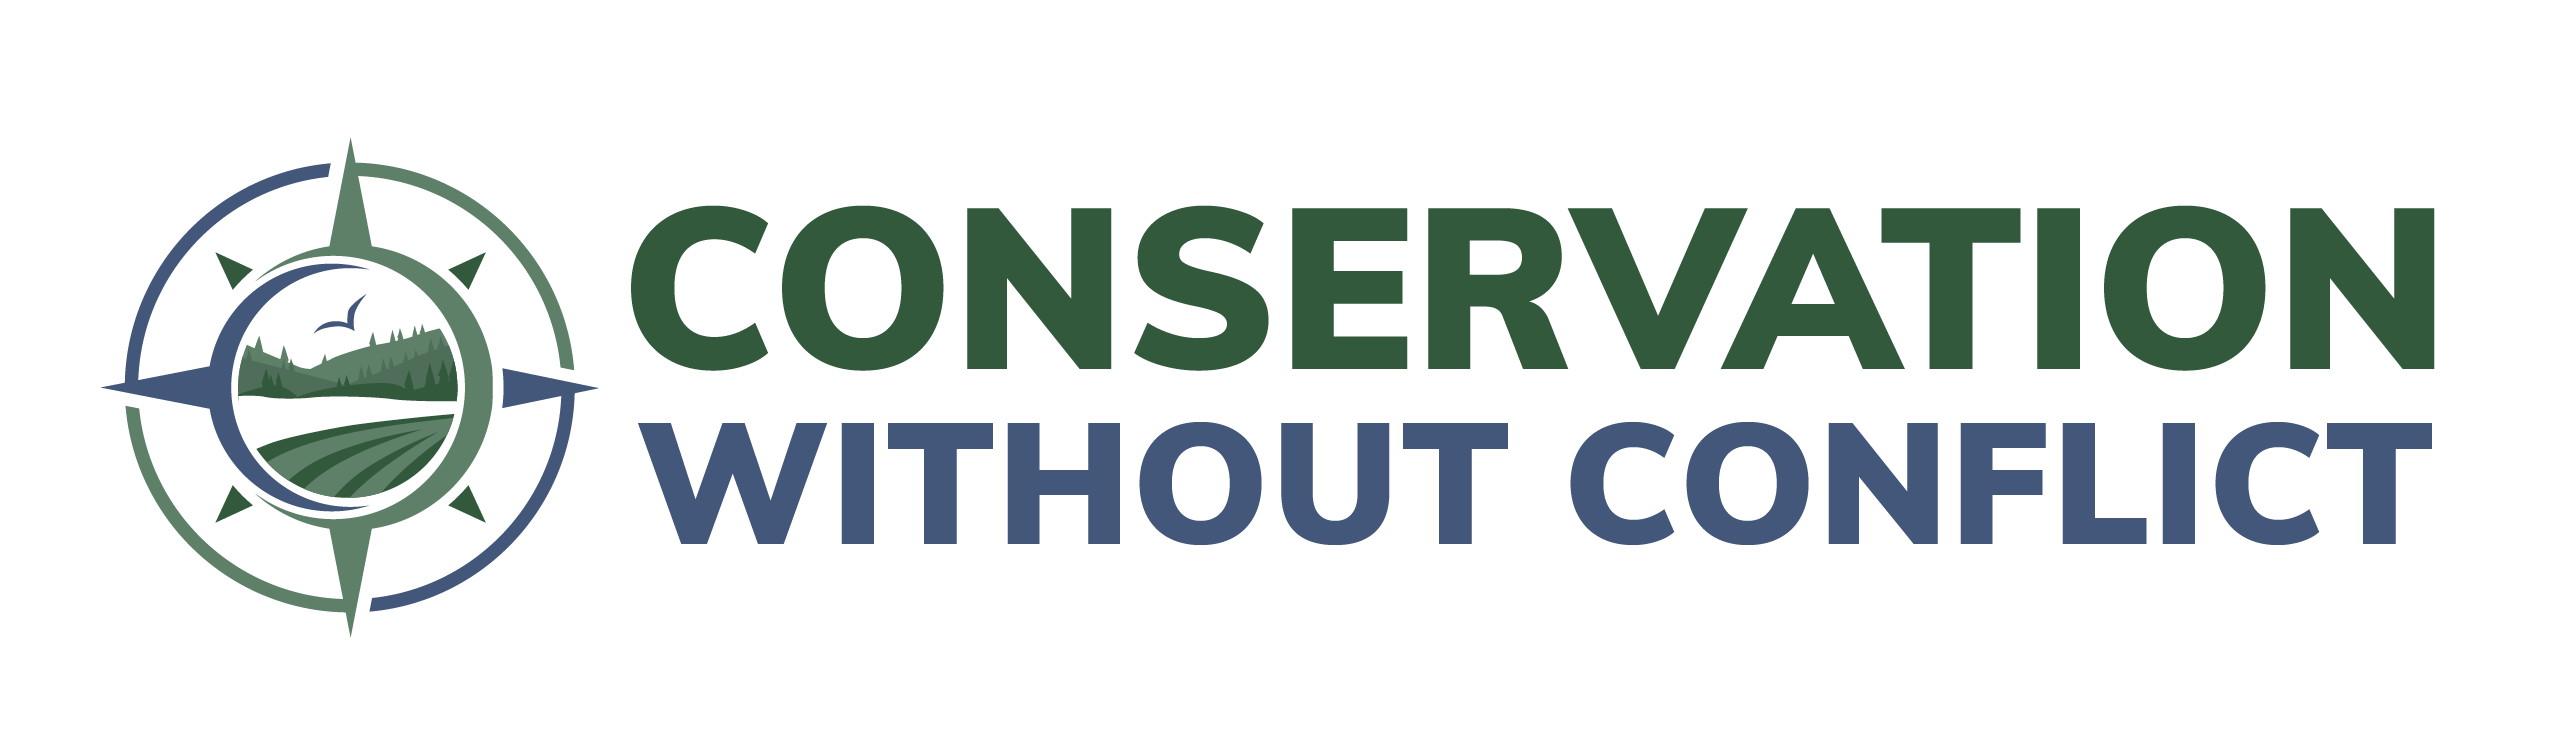 Conservation Without Conflict